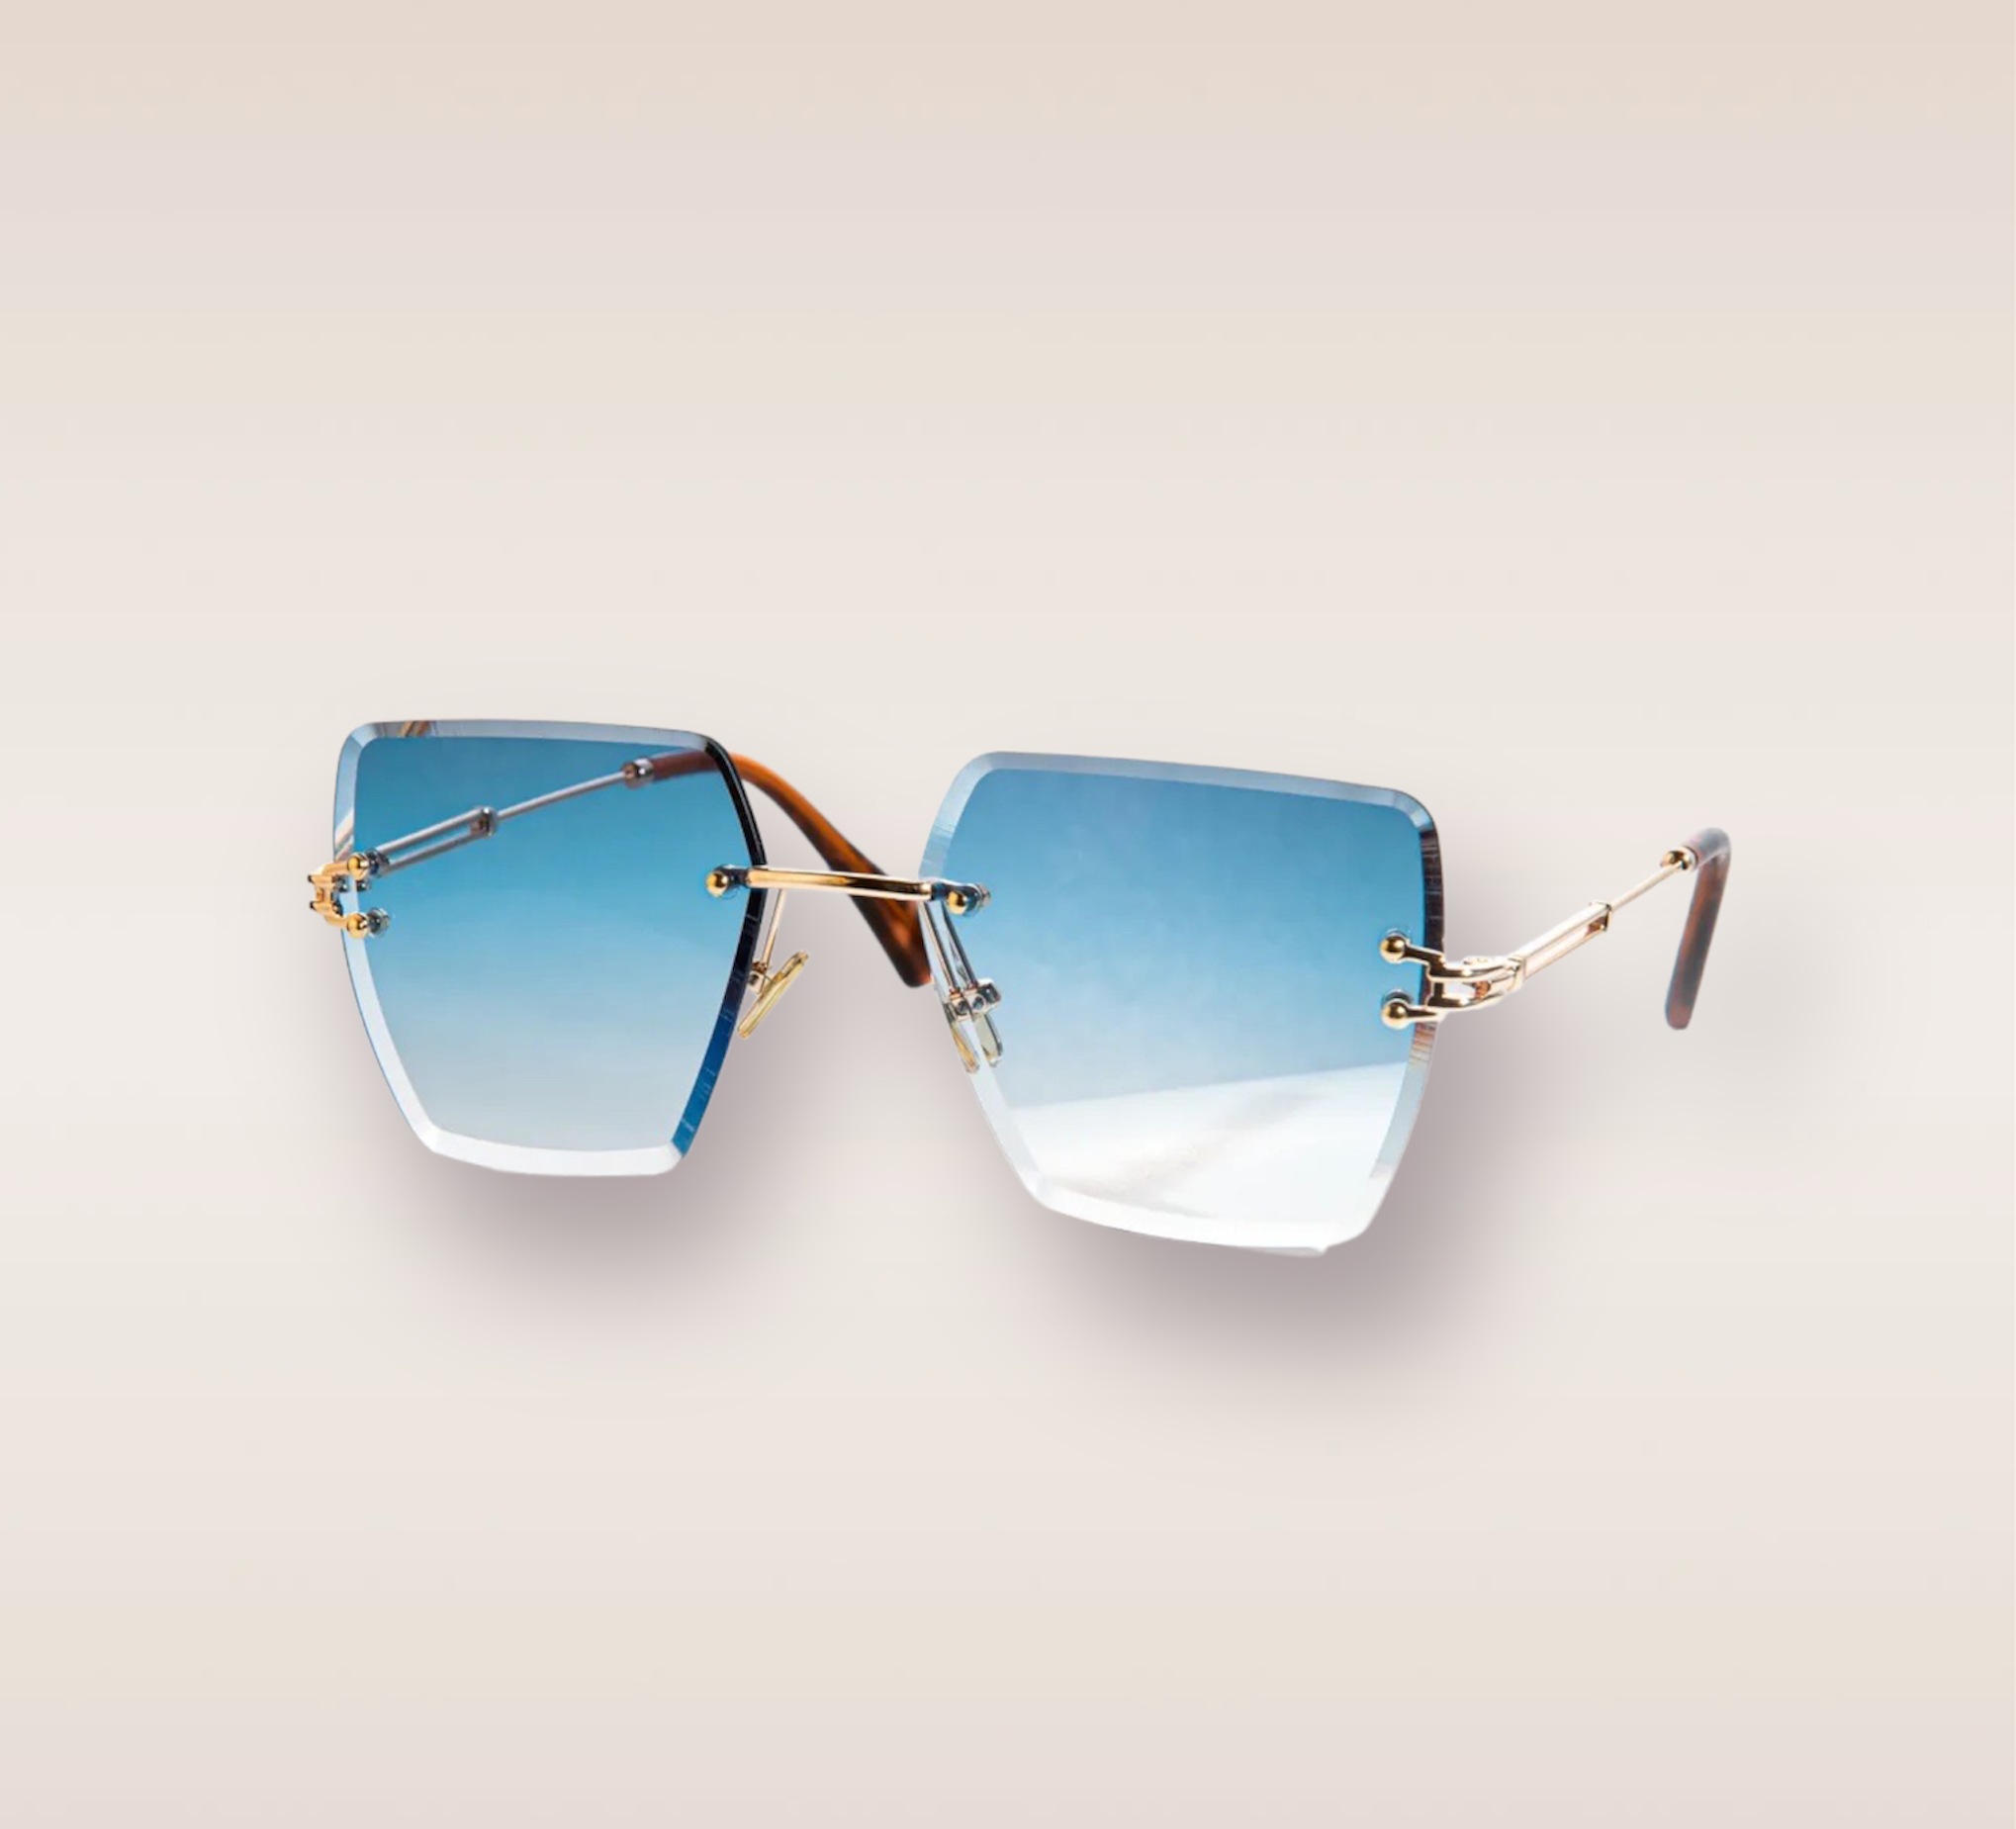 In this up-close shot, we are introduced to the captivating Nipsey Blue frames, a stylish and sophisticated eyewear option. The rimless frames feature a mesmerizing ocean gradient blue hue, evoking a sense of tranquility and depth. The gold arms add a touch of opulence and refinement, complimenting the blue tones with a warm metallic accent. These frames are a true fashion statement, combining modern design with a touch of luxury. 